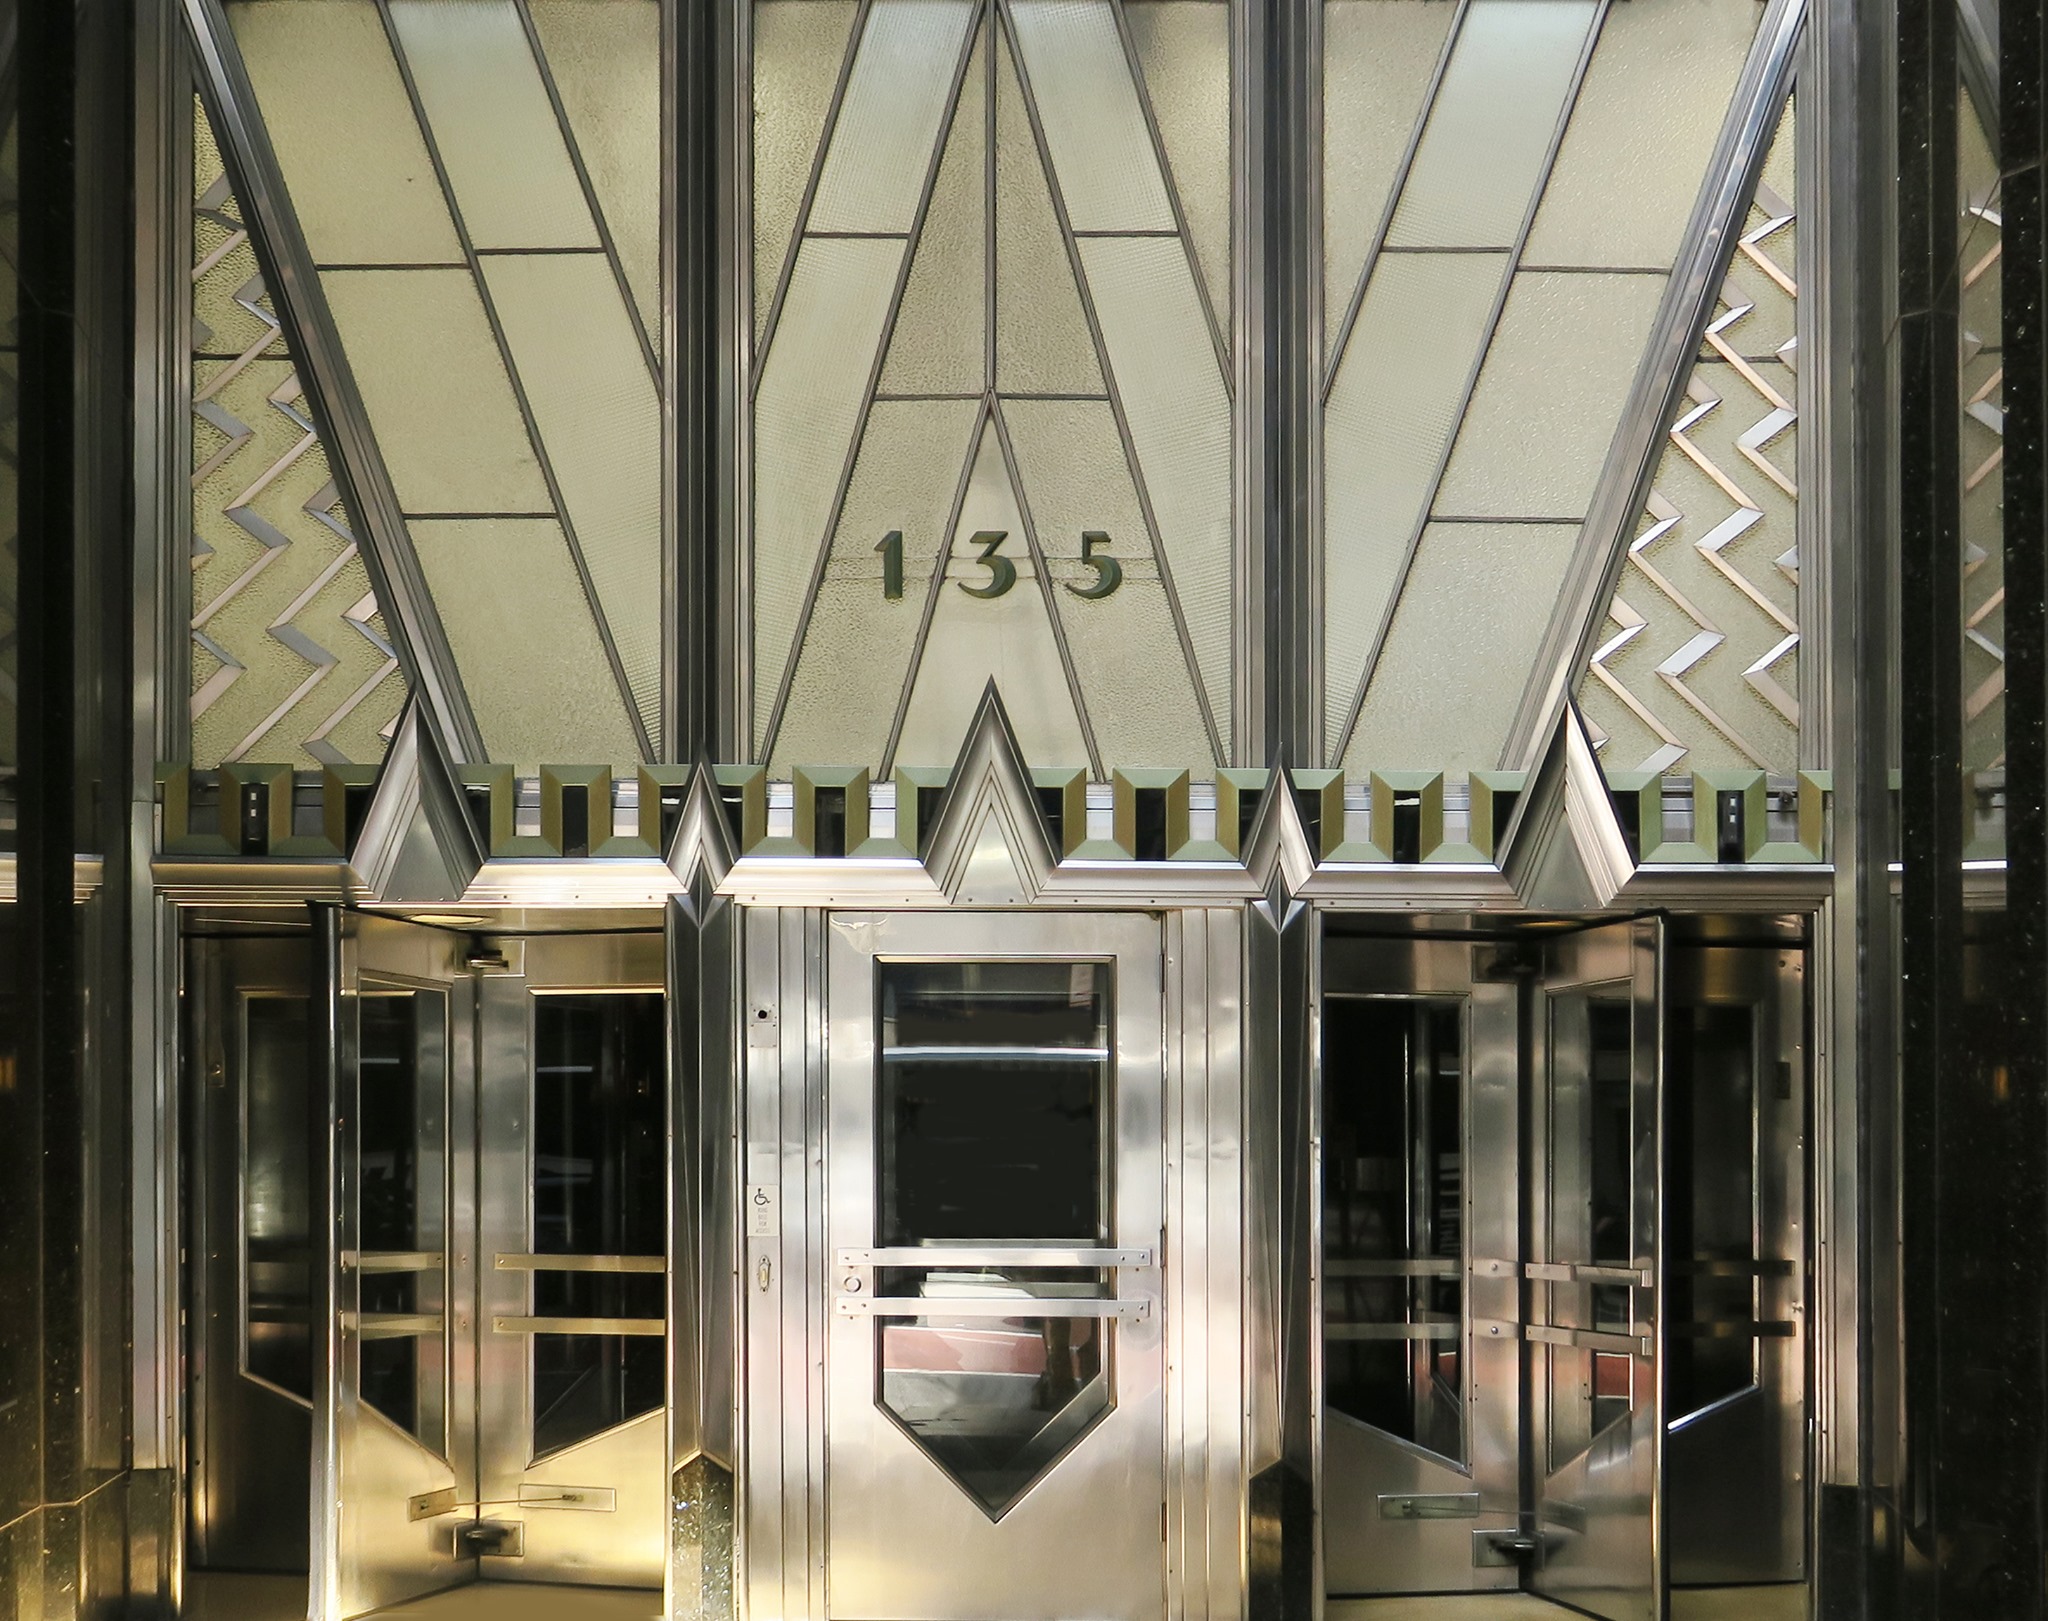 The 77-story Art Deco masterpiece by architect William Van Allen opened on May 27, 1930. For a brief 11 months, it was the tallest building in the world, until eclipsed by the Empire State Building.